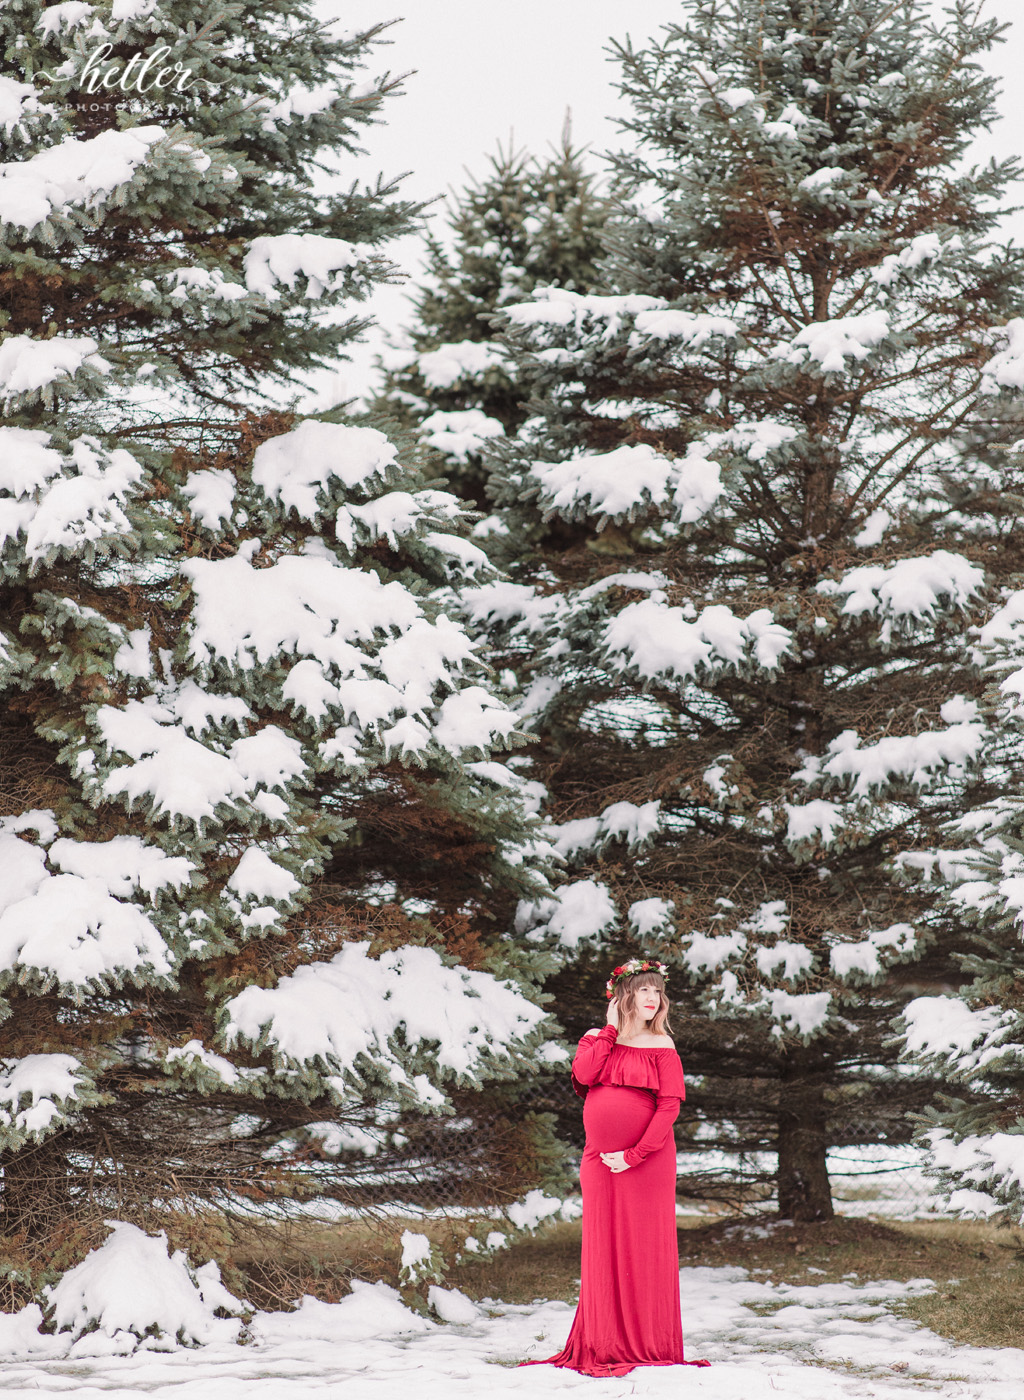 Grand Rapids winter maternity photo session with a red dress and a flower crown from Fleurology Designs